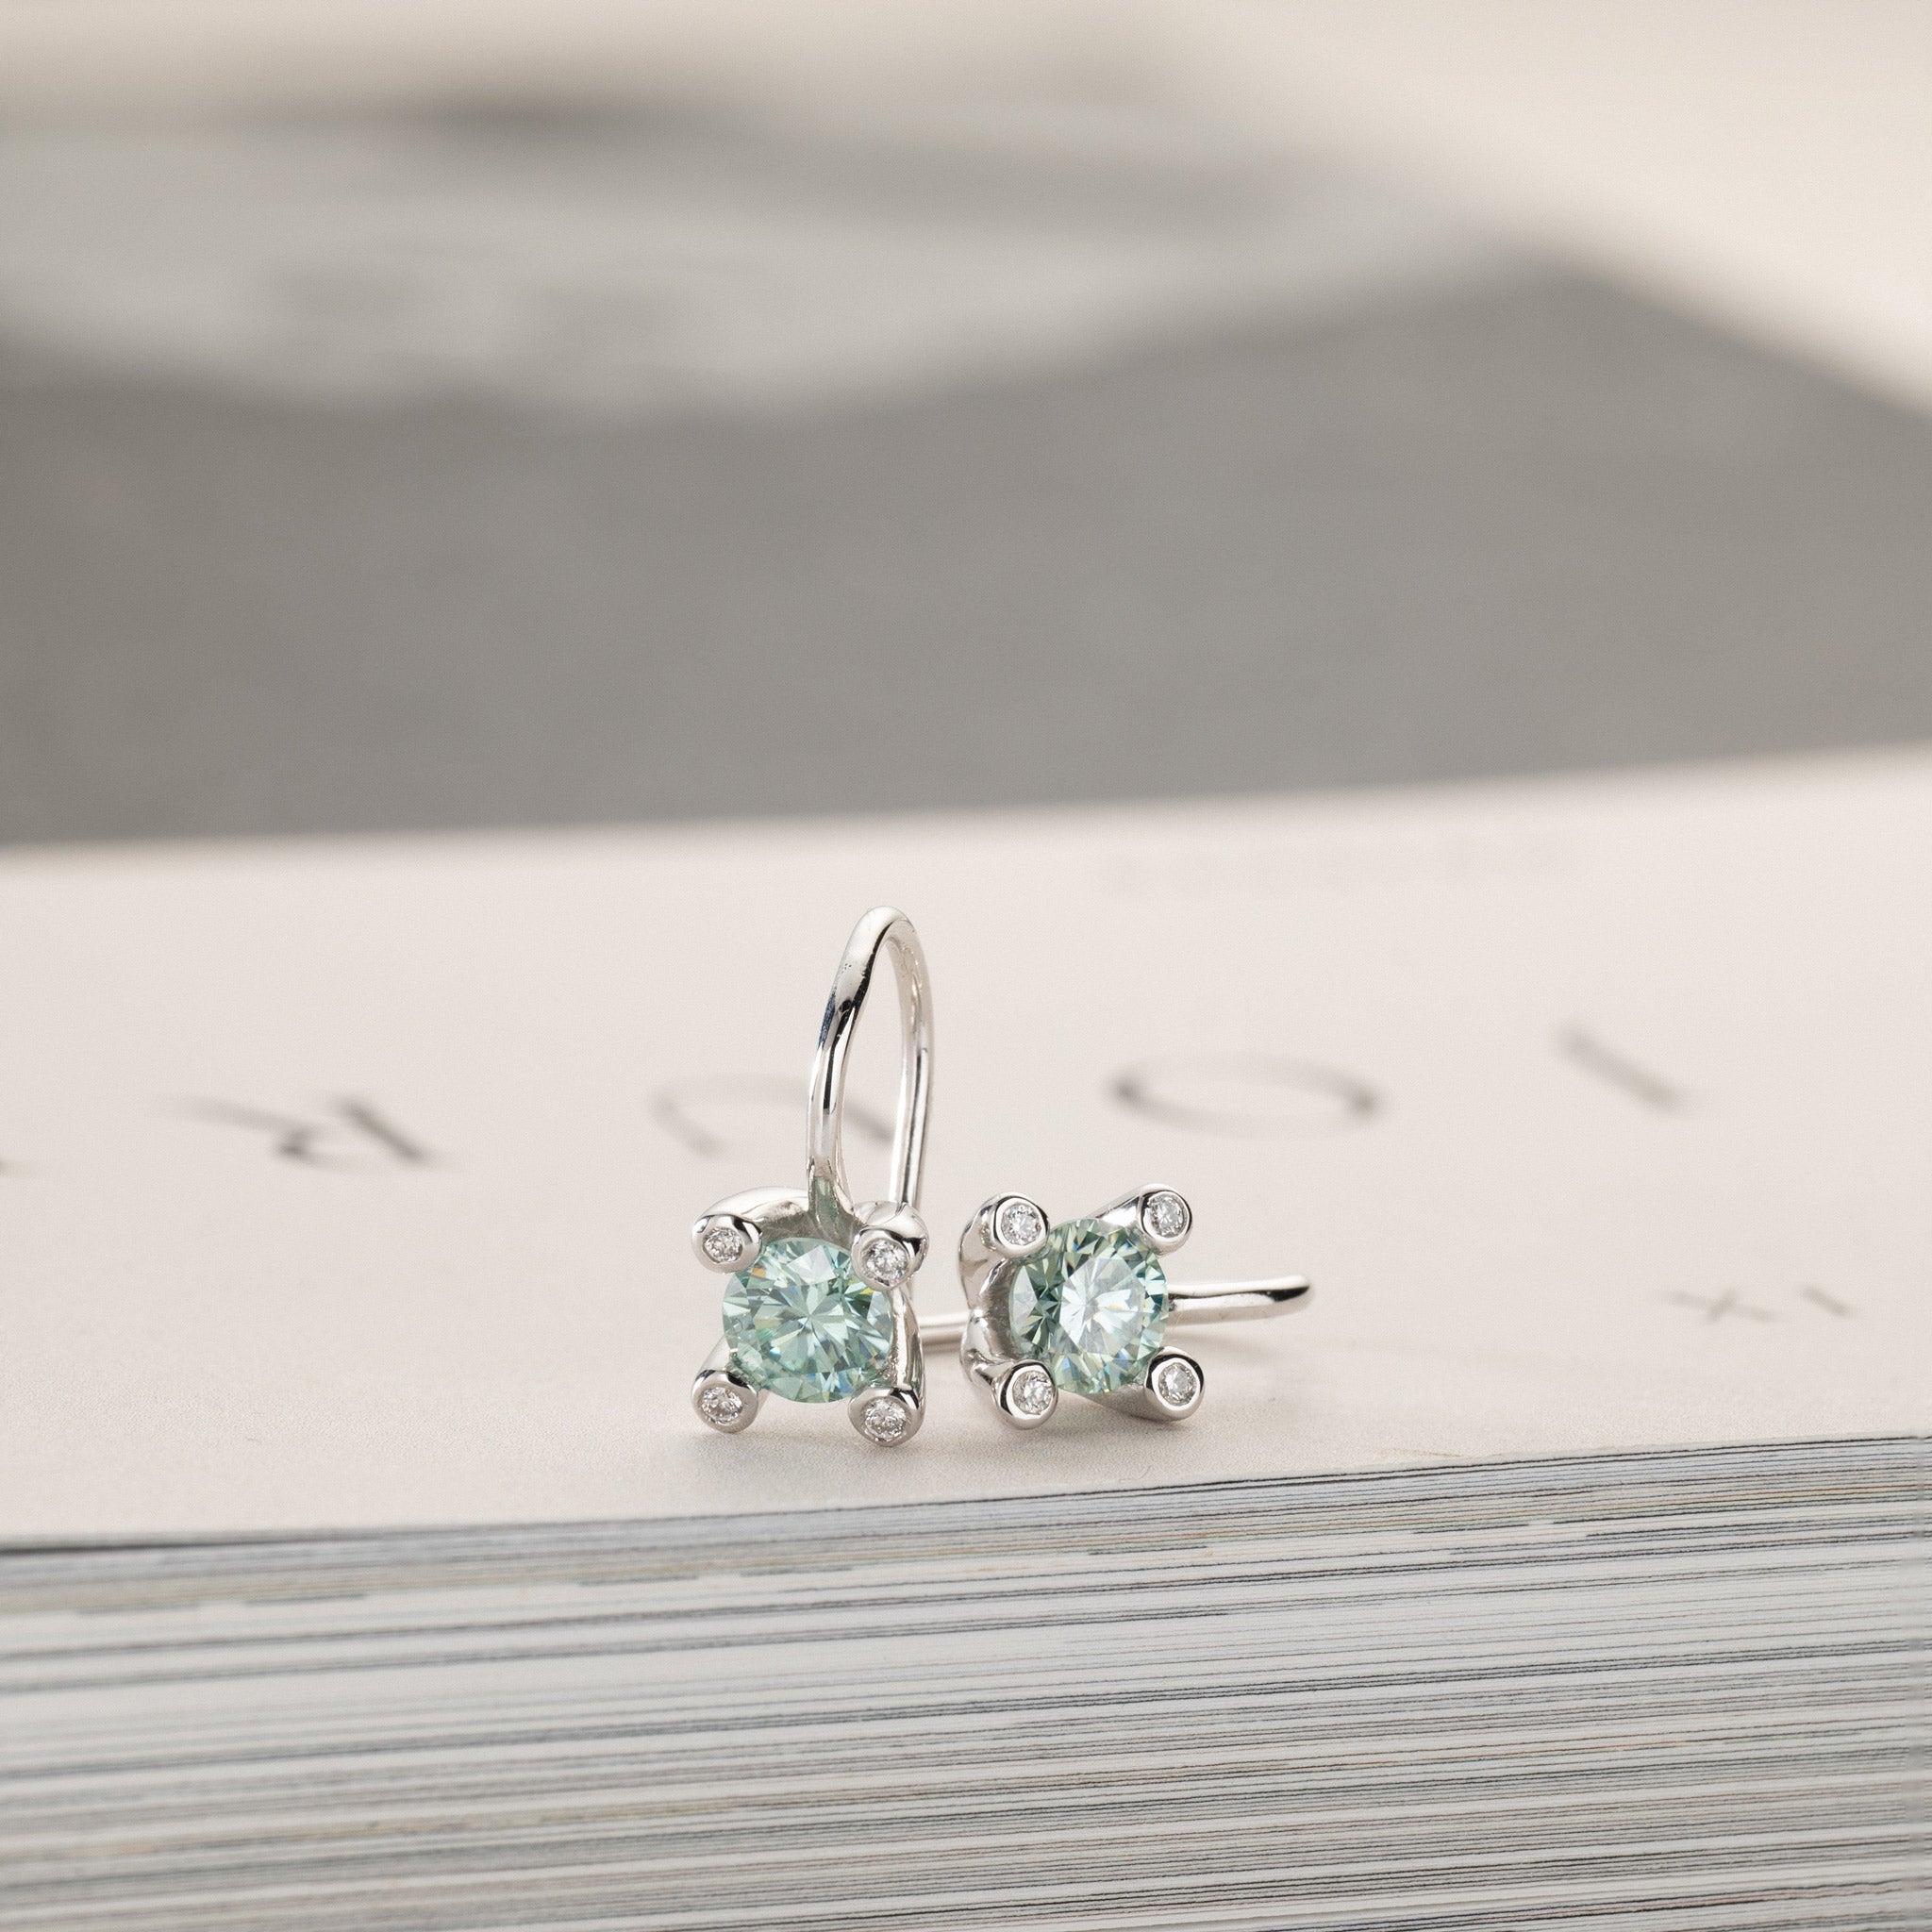 2x0.50ct green moissanite solitaire earrings silver diamonds in crown Miriam